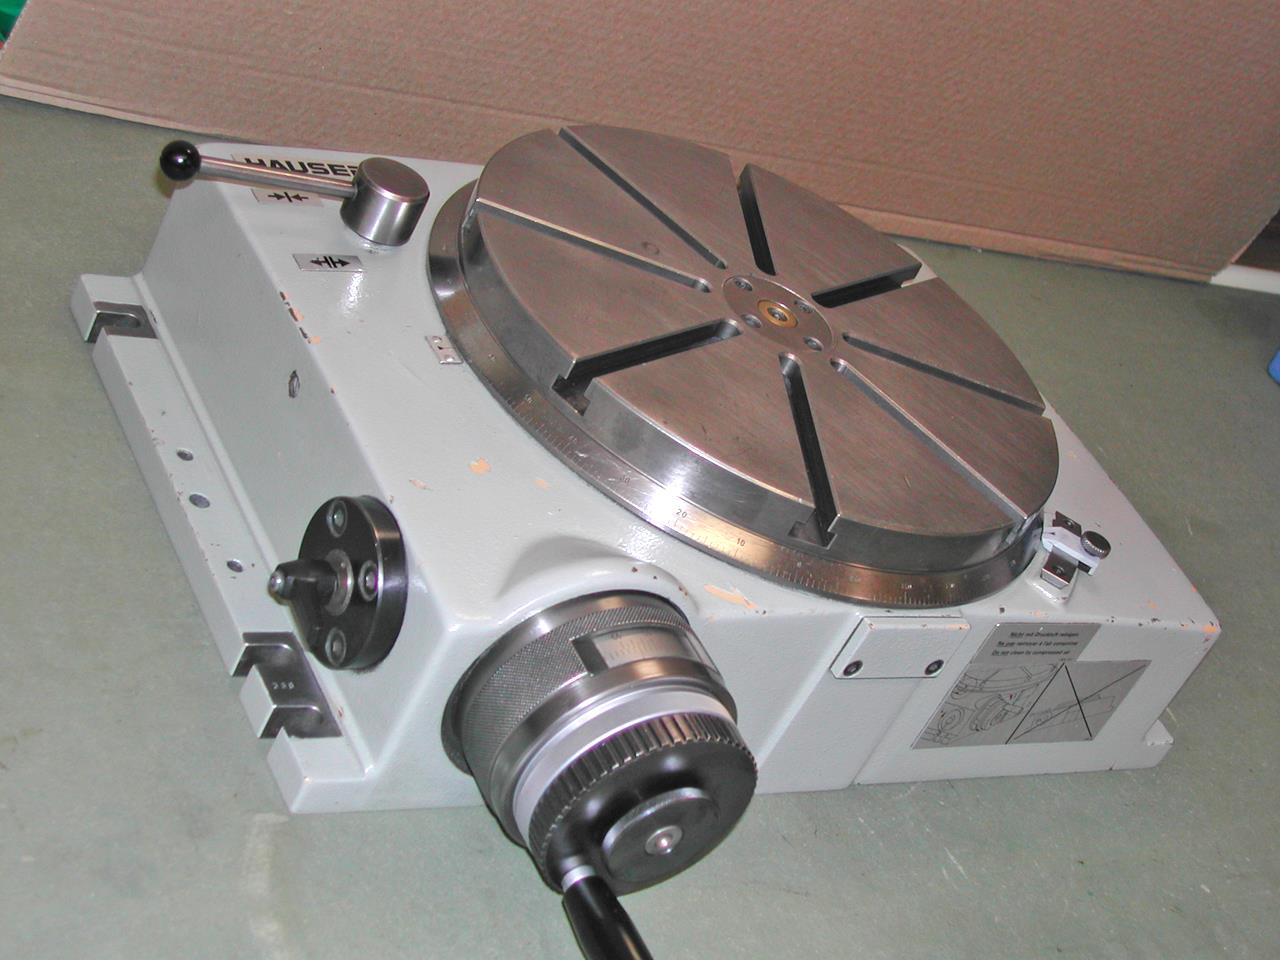 Rotary Tables/HAUSER  300